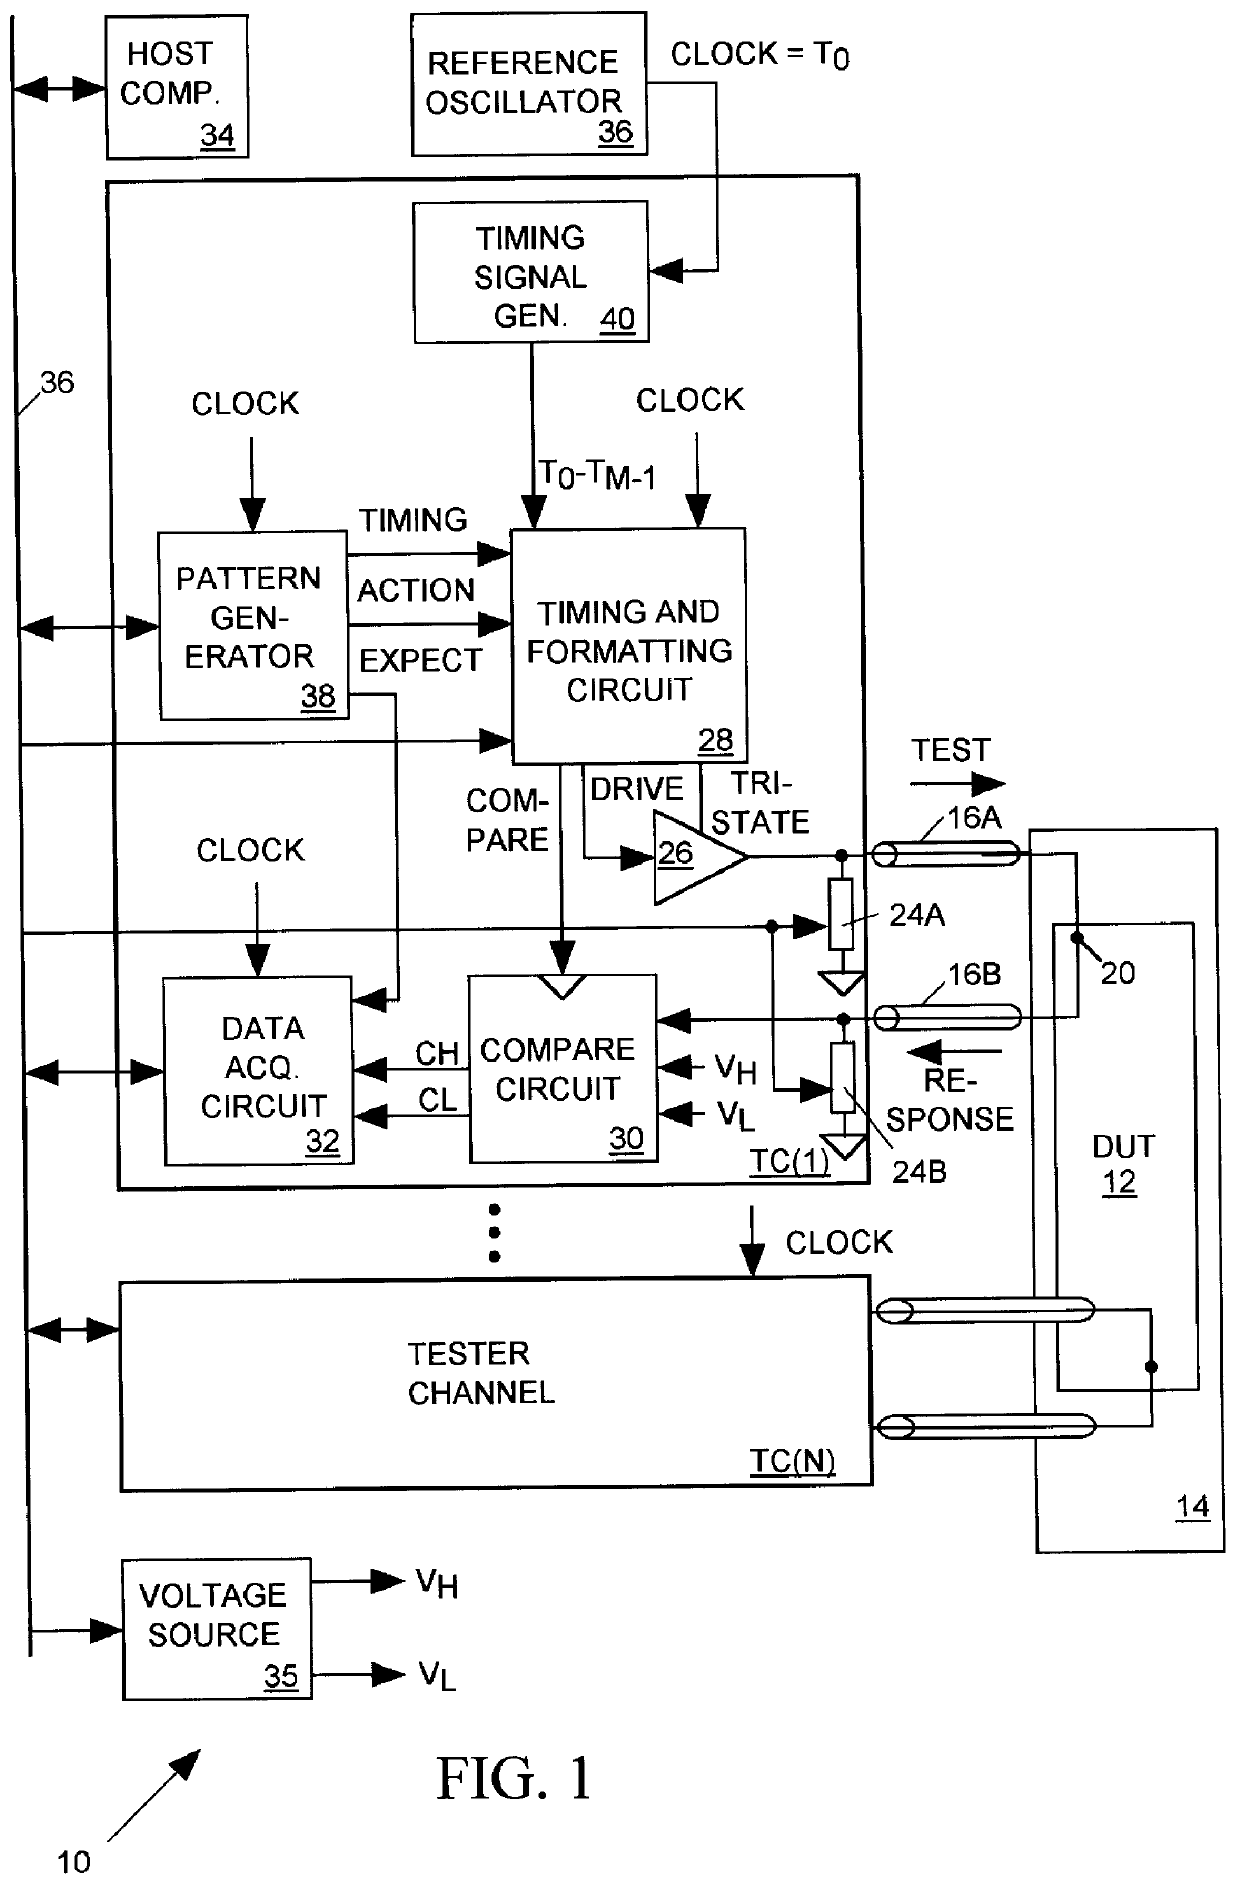 Salphasic timing calibration system for an integrated circuit tester